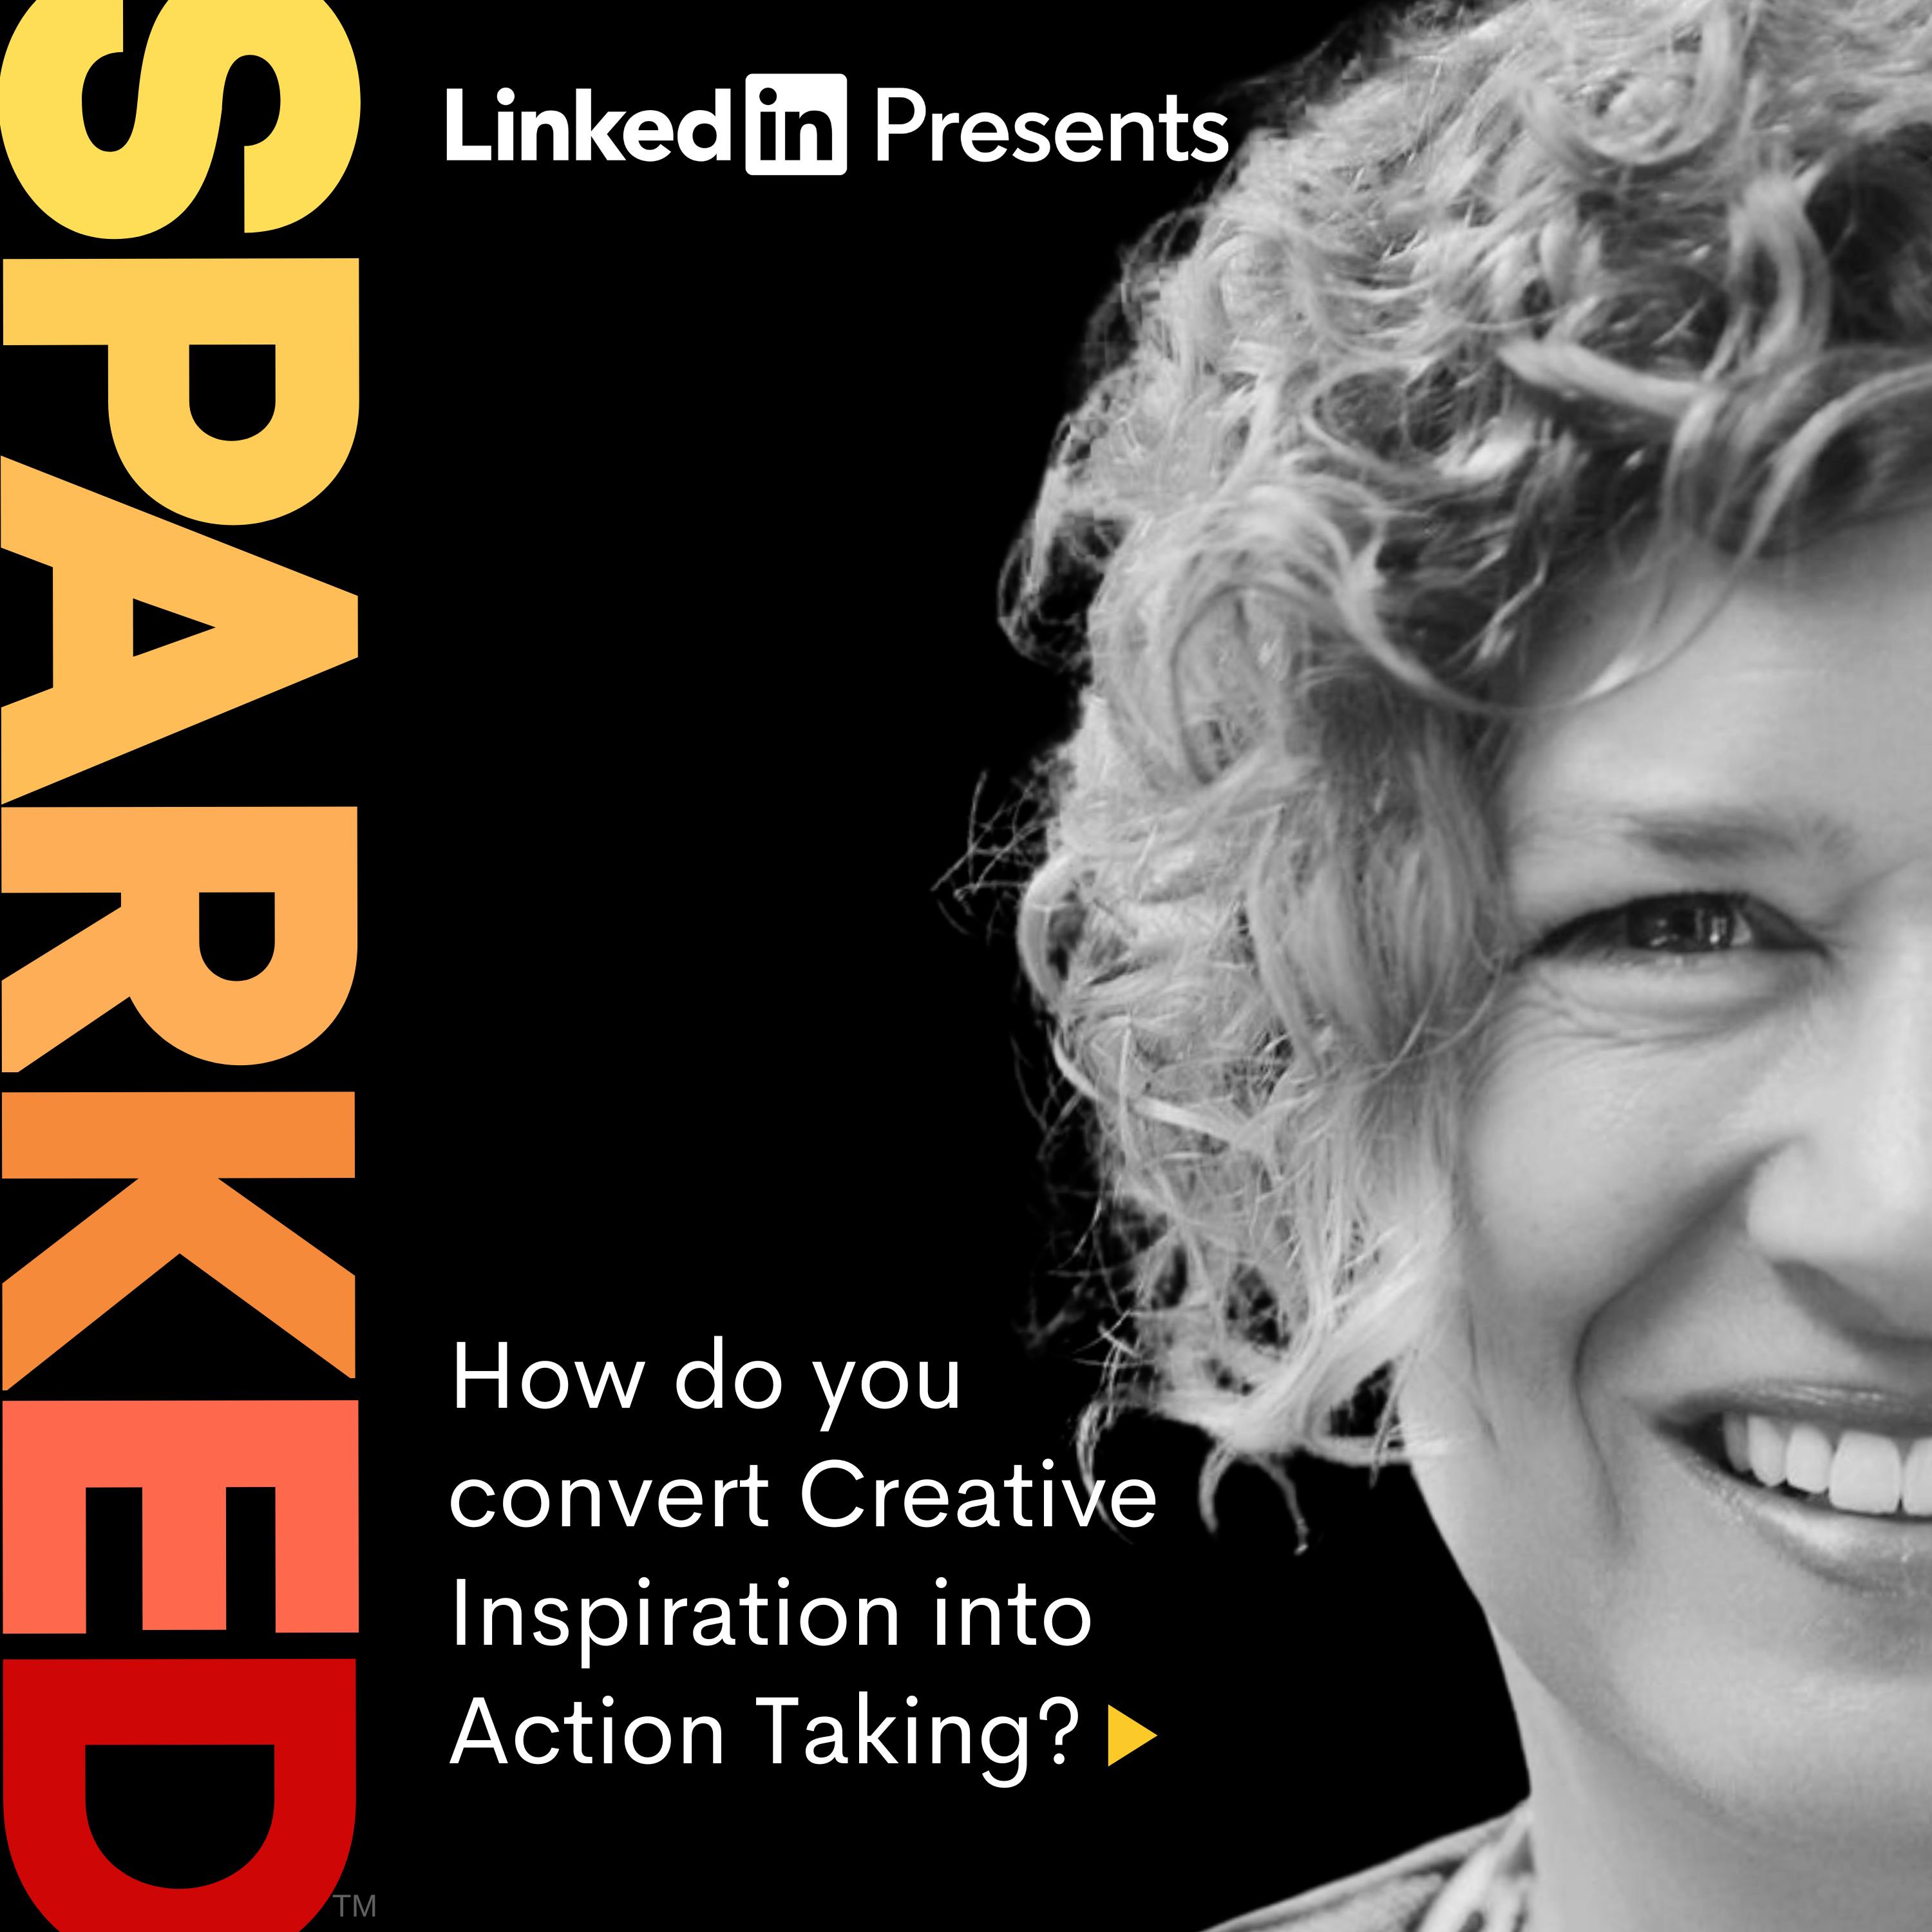 How to convert Creative Inspiration into Action Taking with Cynthia Morris Image